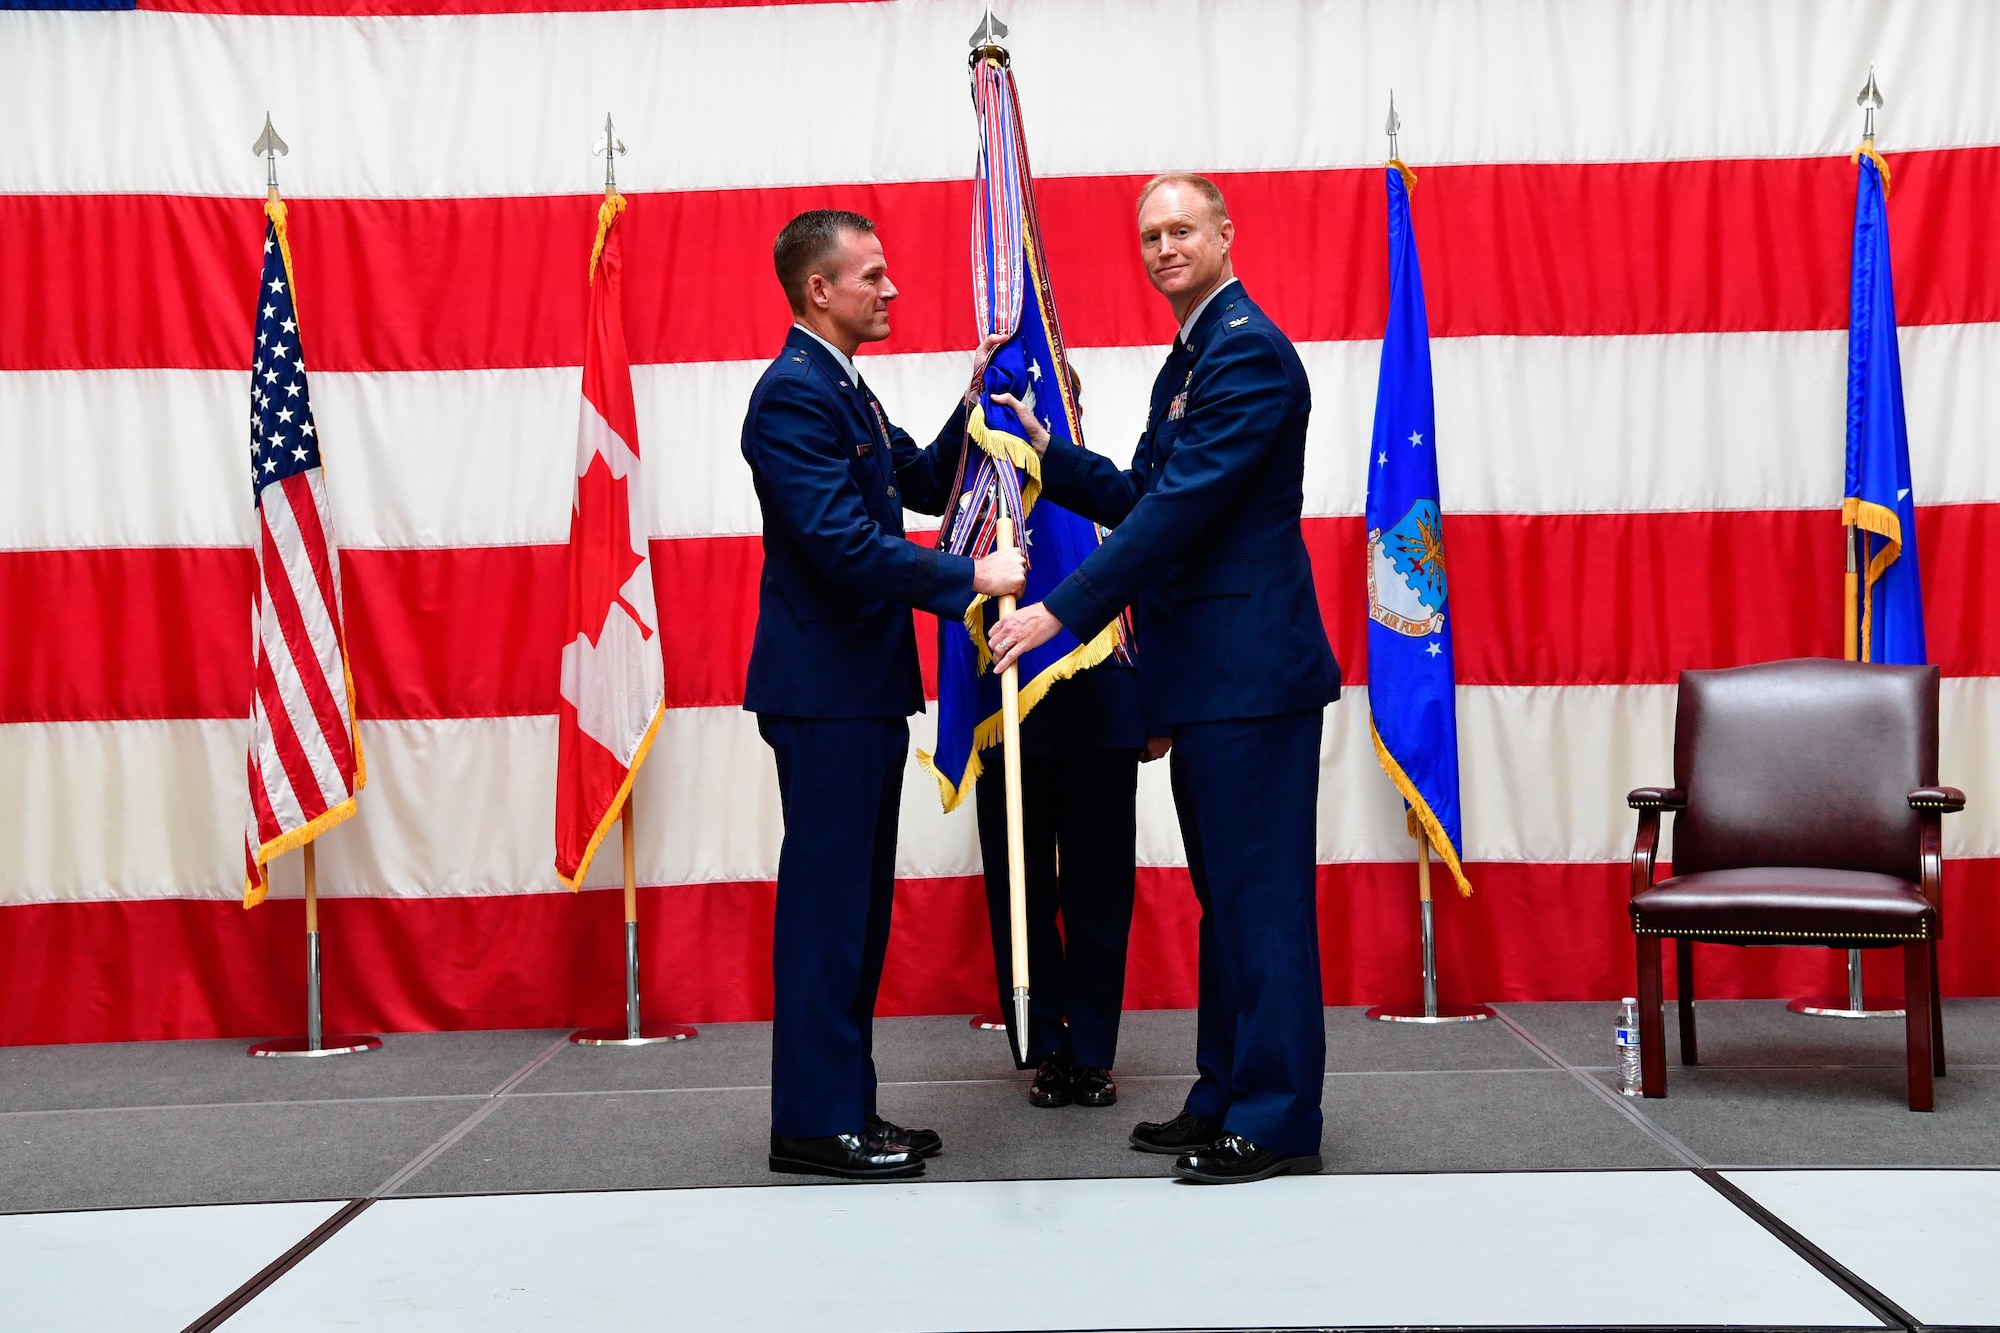 Col. Gregory Lewis (right) accepts command of the Western Air Defense Sector from the assumption of command presiding officer, Brig. Gen. Kenneth Ekman, First Air Force and Air Forces Northern Command vice commander, at the Washington Army National Guard Readiness Center, Joint Base Lewis-McChord, July 31, 2018.